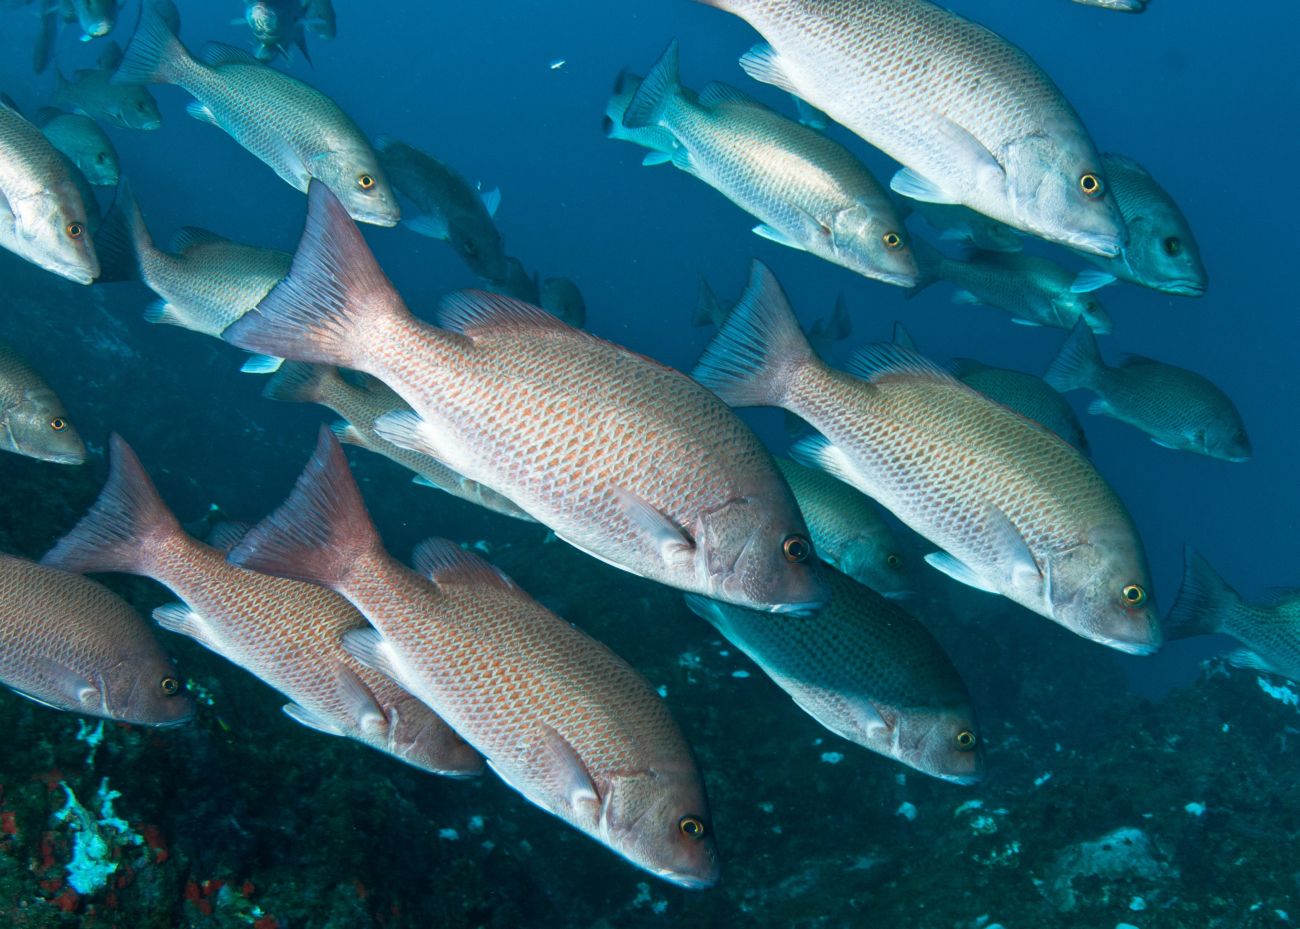 A school of gray snapper with some in the dark reddishbrown phase during a coral bleaching event